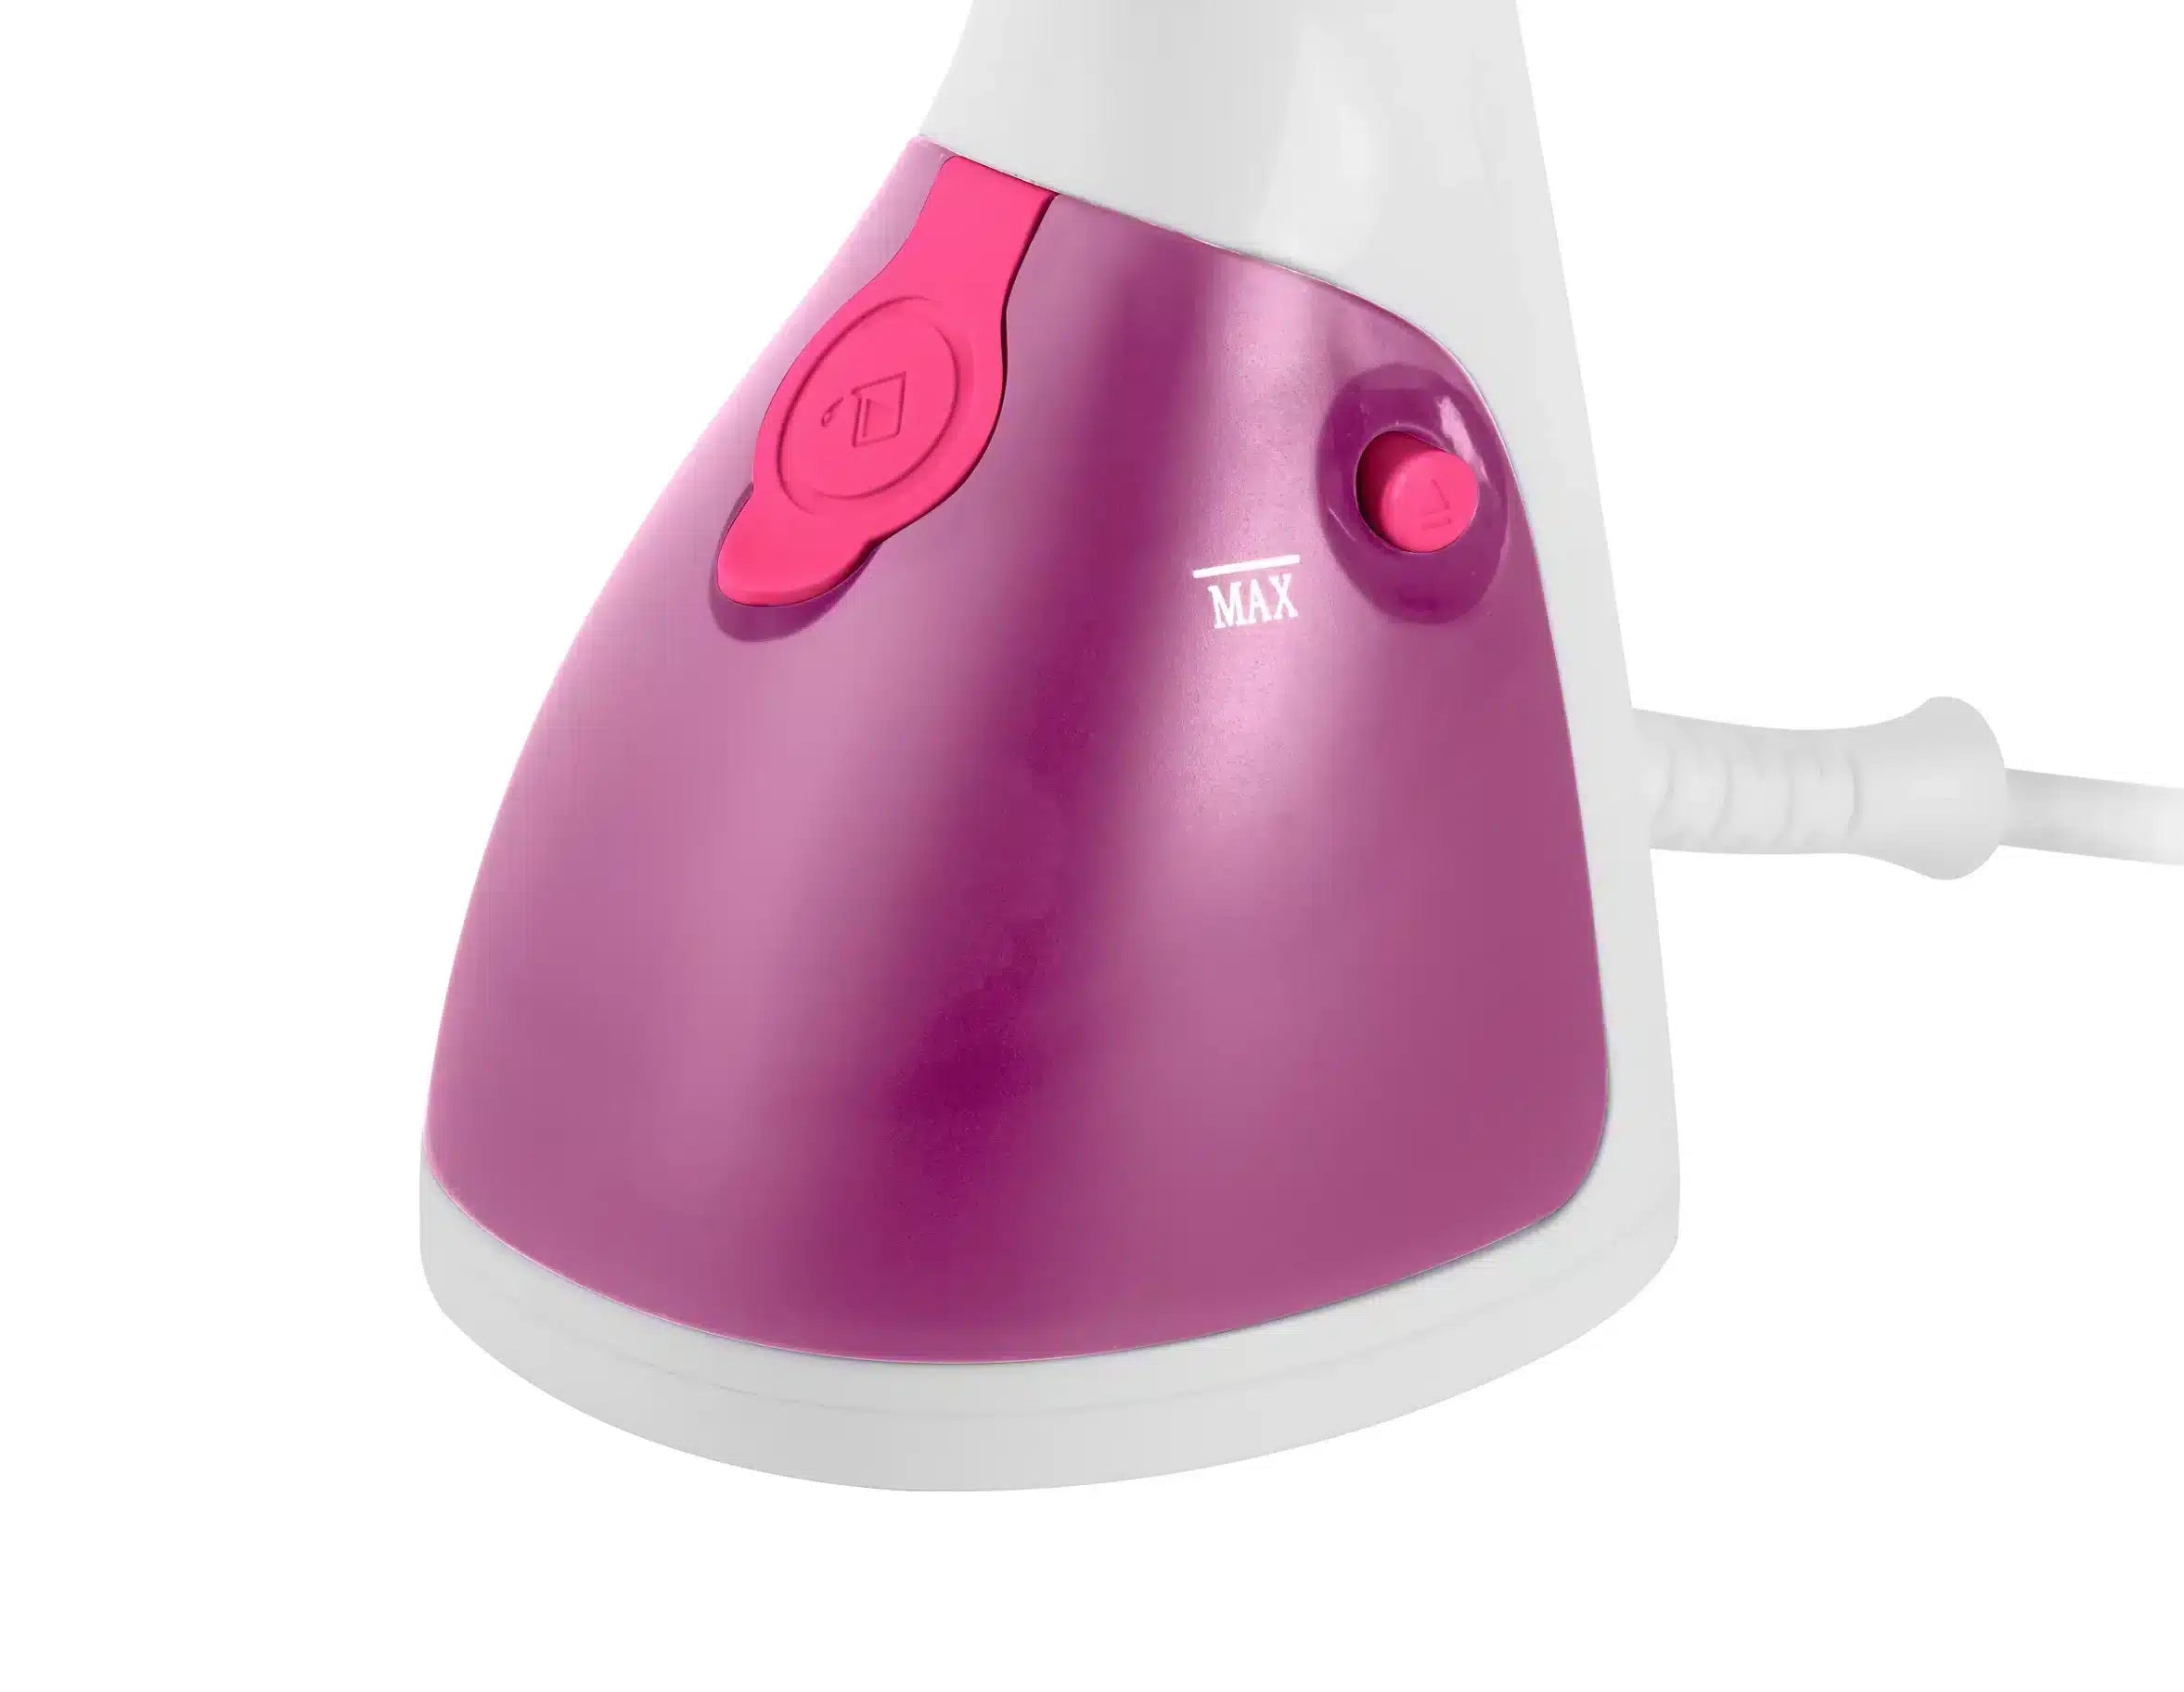 Swan, SI12020N, Handheld Garment Steamer, Lightweight and Compact, 1100W, Iron-8201